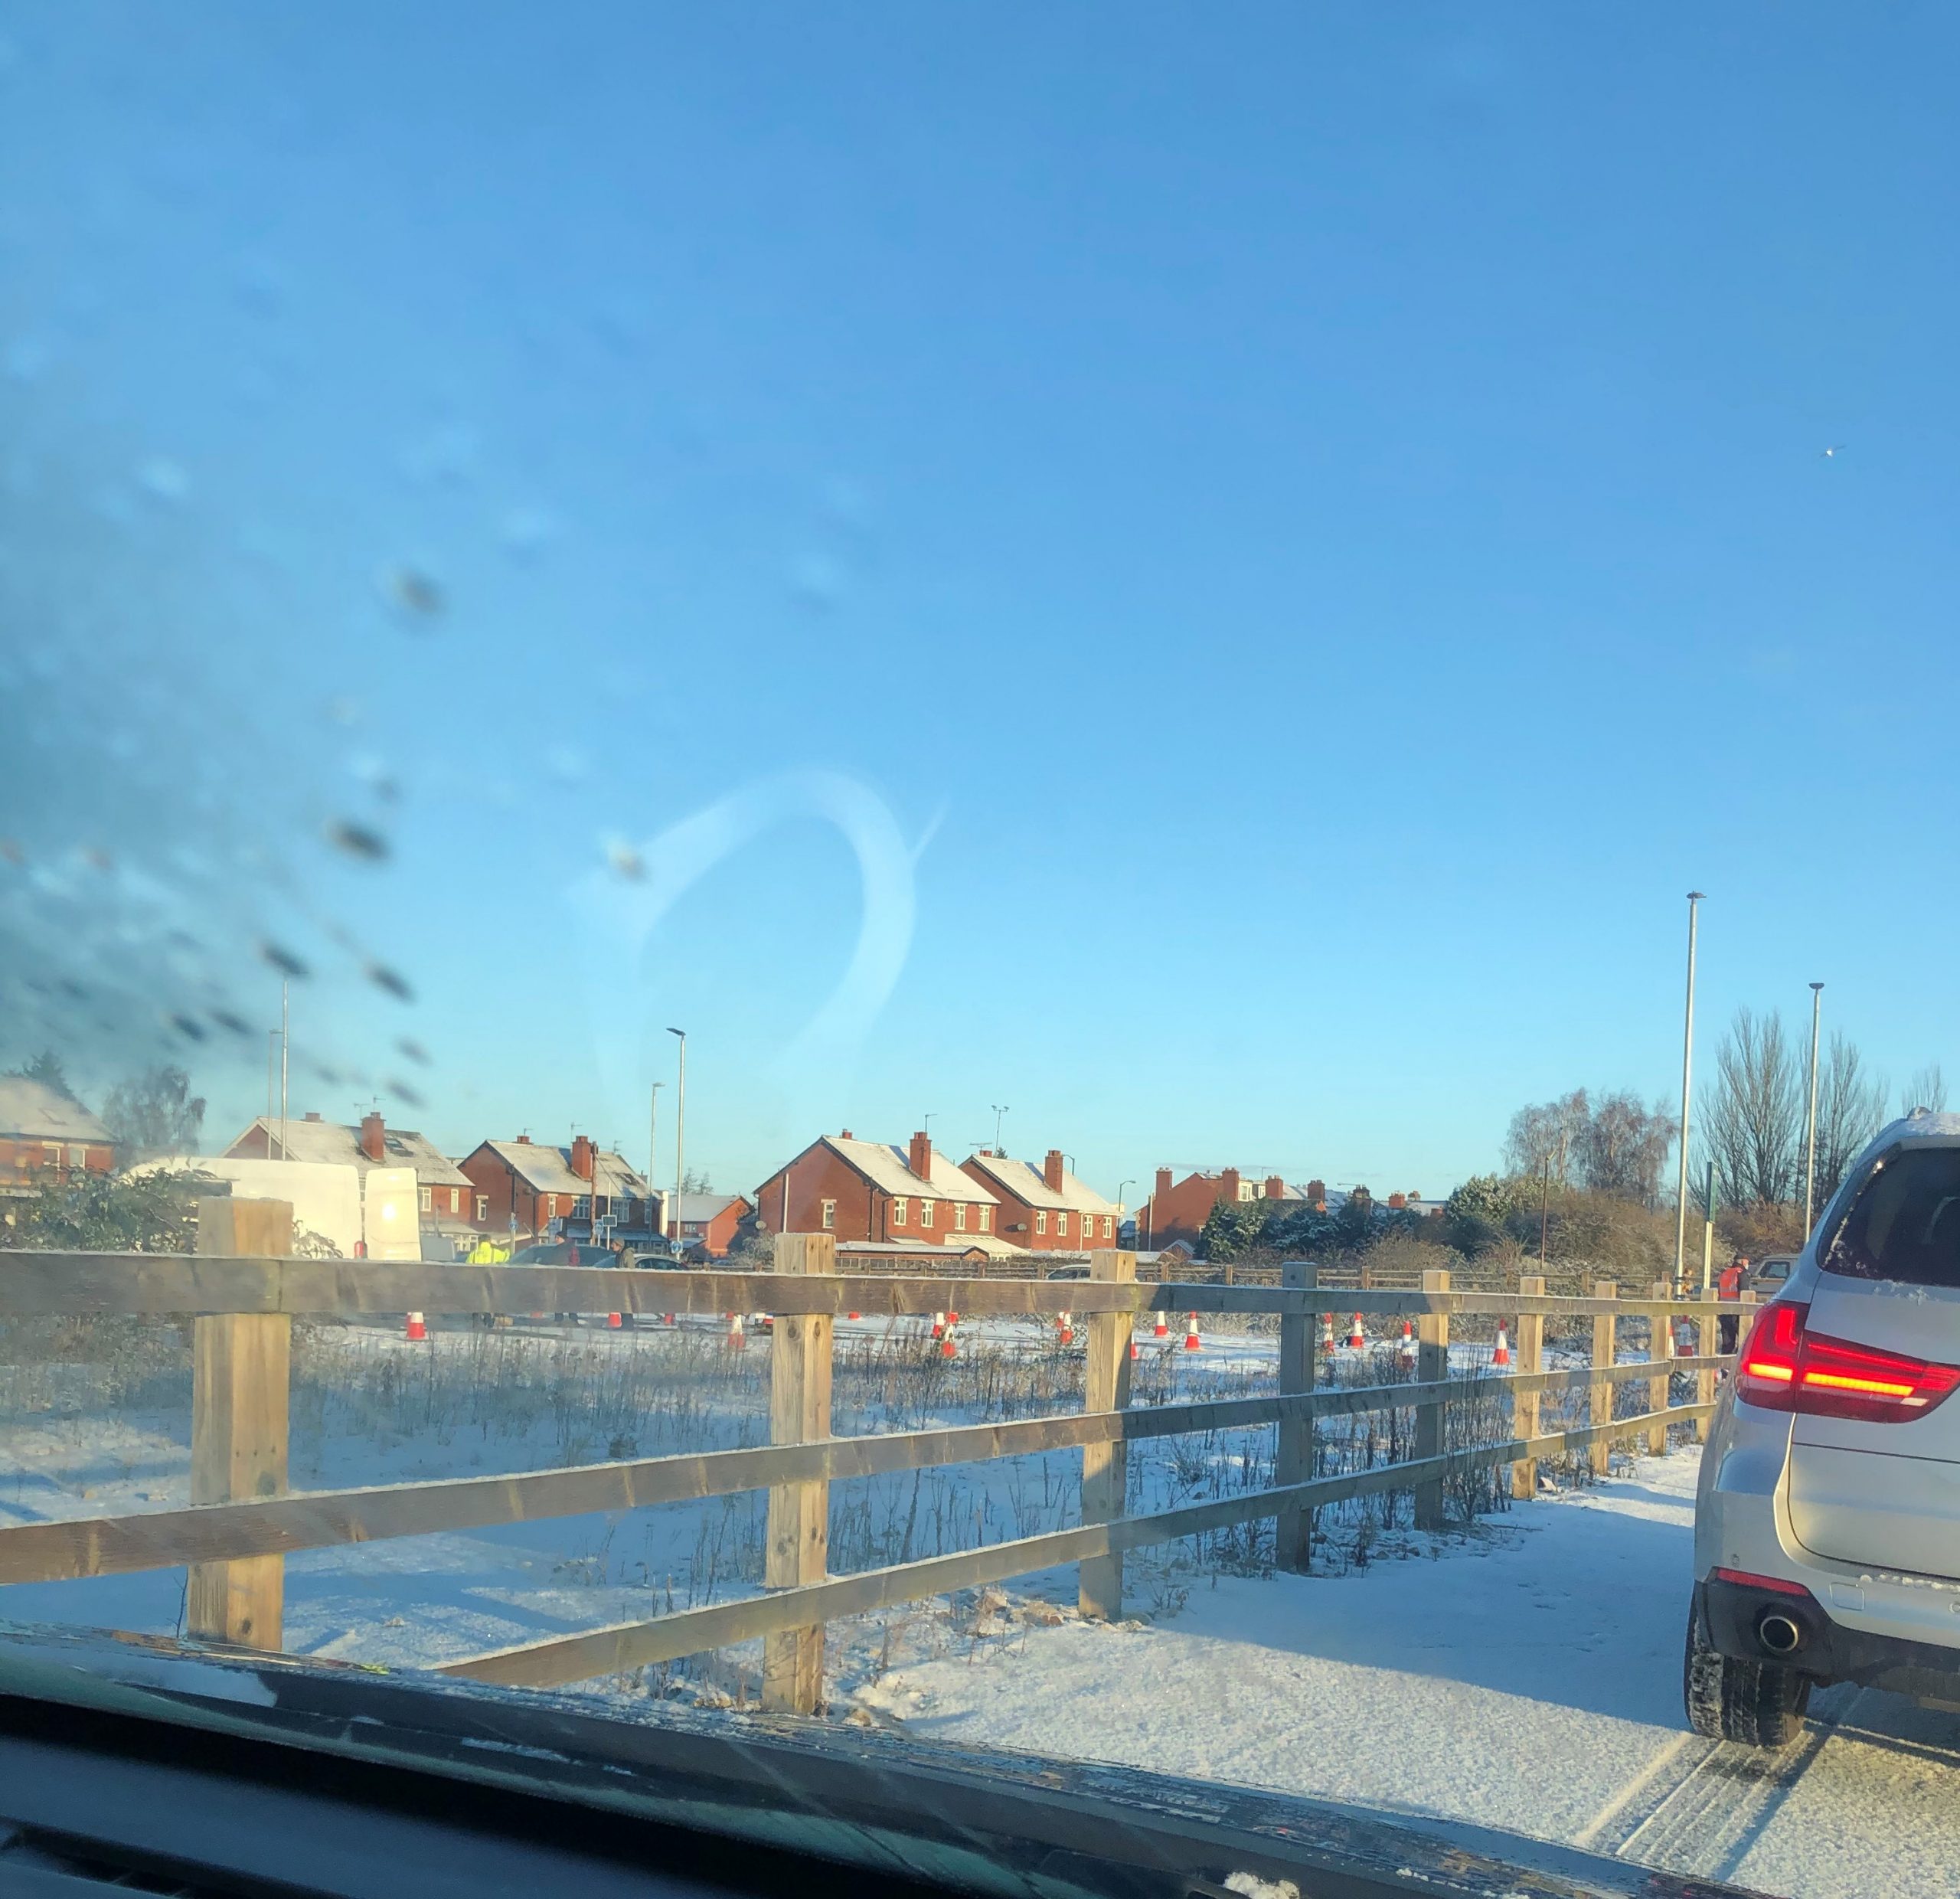 NEWS | Hereford’s COVID-19 testing centre at Merton Meadow temporarily closed due to ice